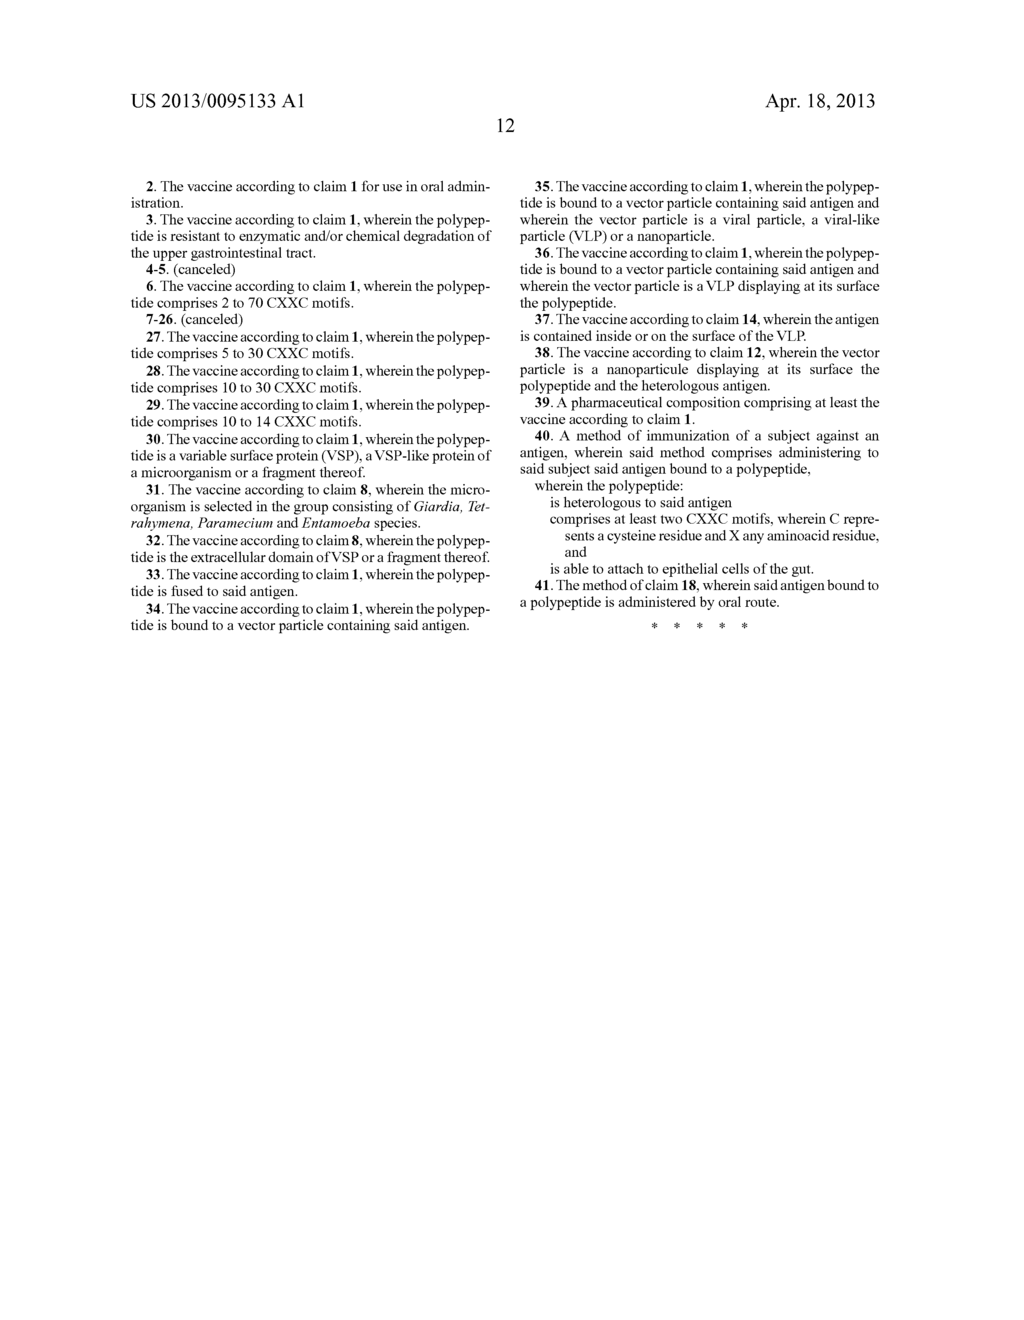 PHARMACEUTICAL COMPOSITIONS COMPRISING A POLYPEPTIDE COMPRISING AT LEAST     ONE CXXC MOTIF AND HETEROLOGOUS ANTIGENS AND USES THEREOF - diagram, schematic, and image 18